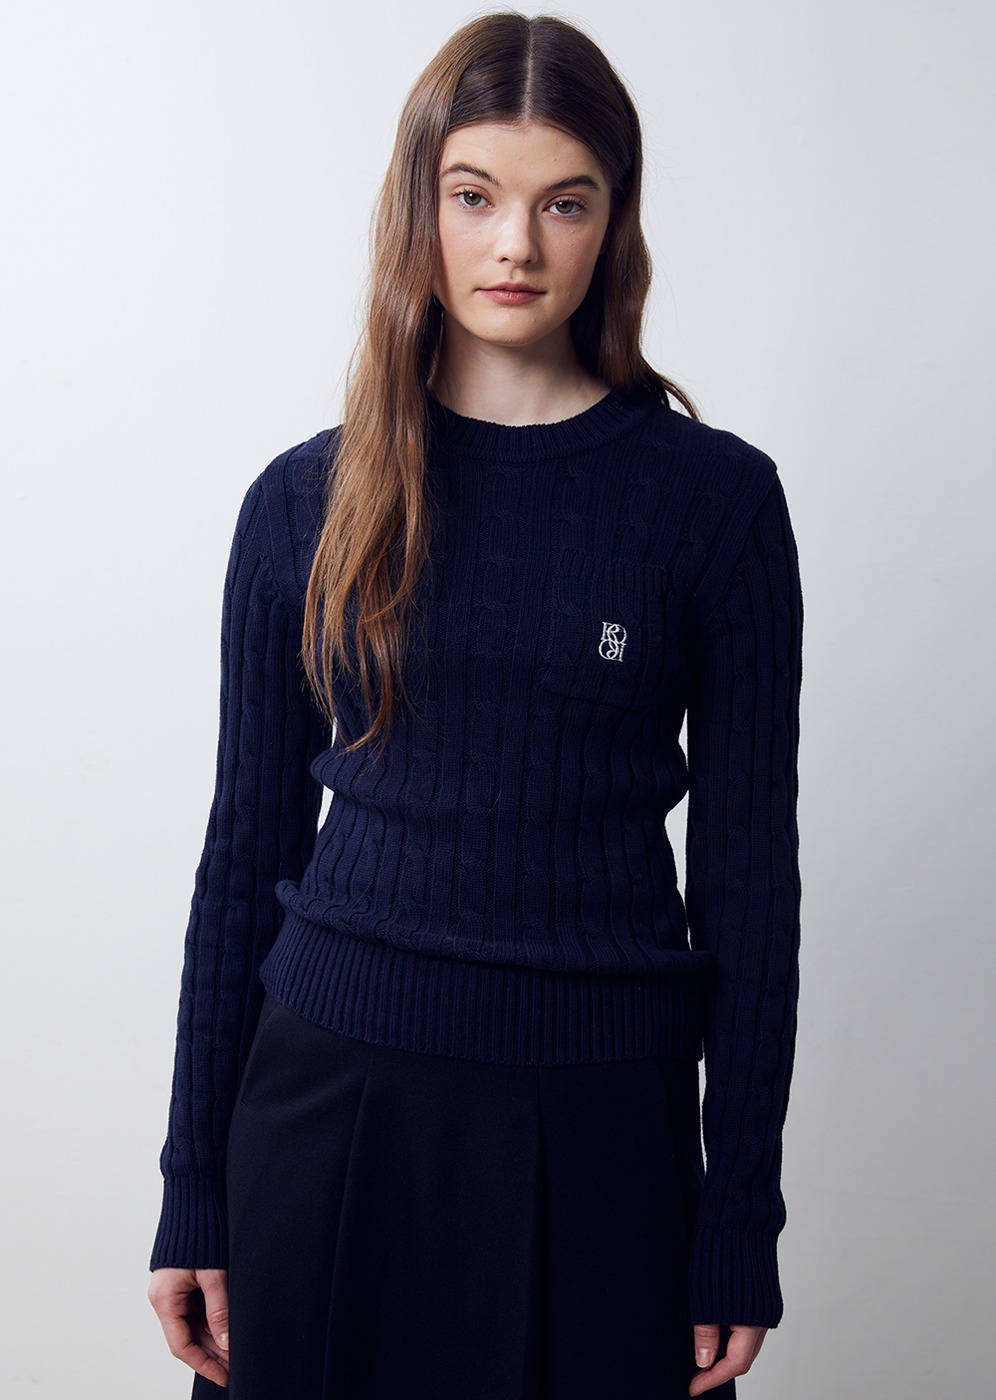 *Classic Symbol Cable Knit Top [NAVY]*Classic Symbol Cable Knit Top [NAVY]로씨로씨